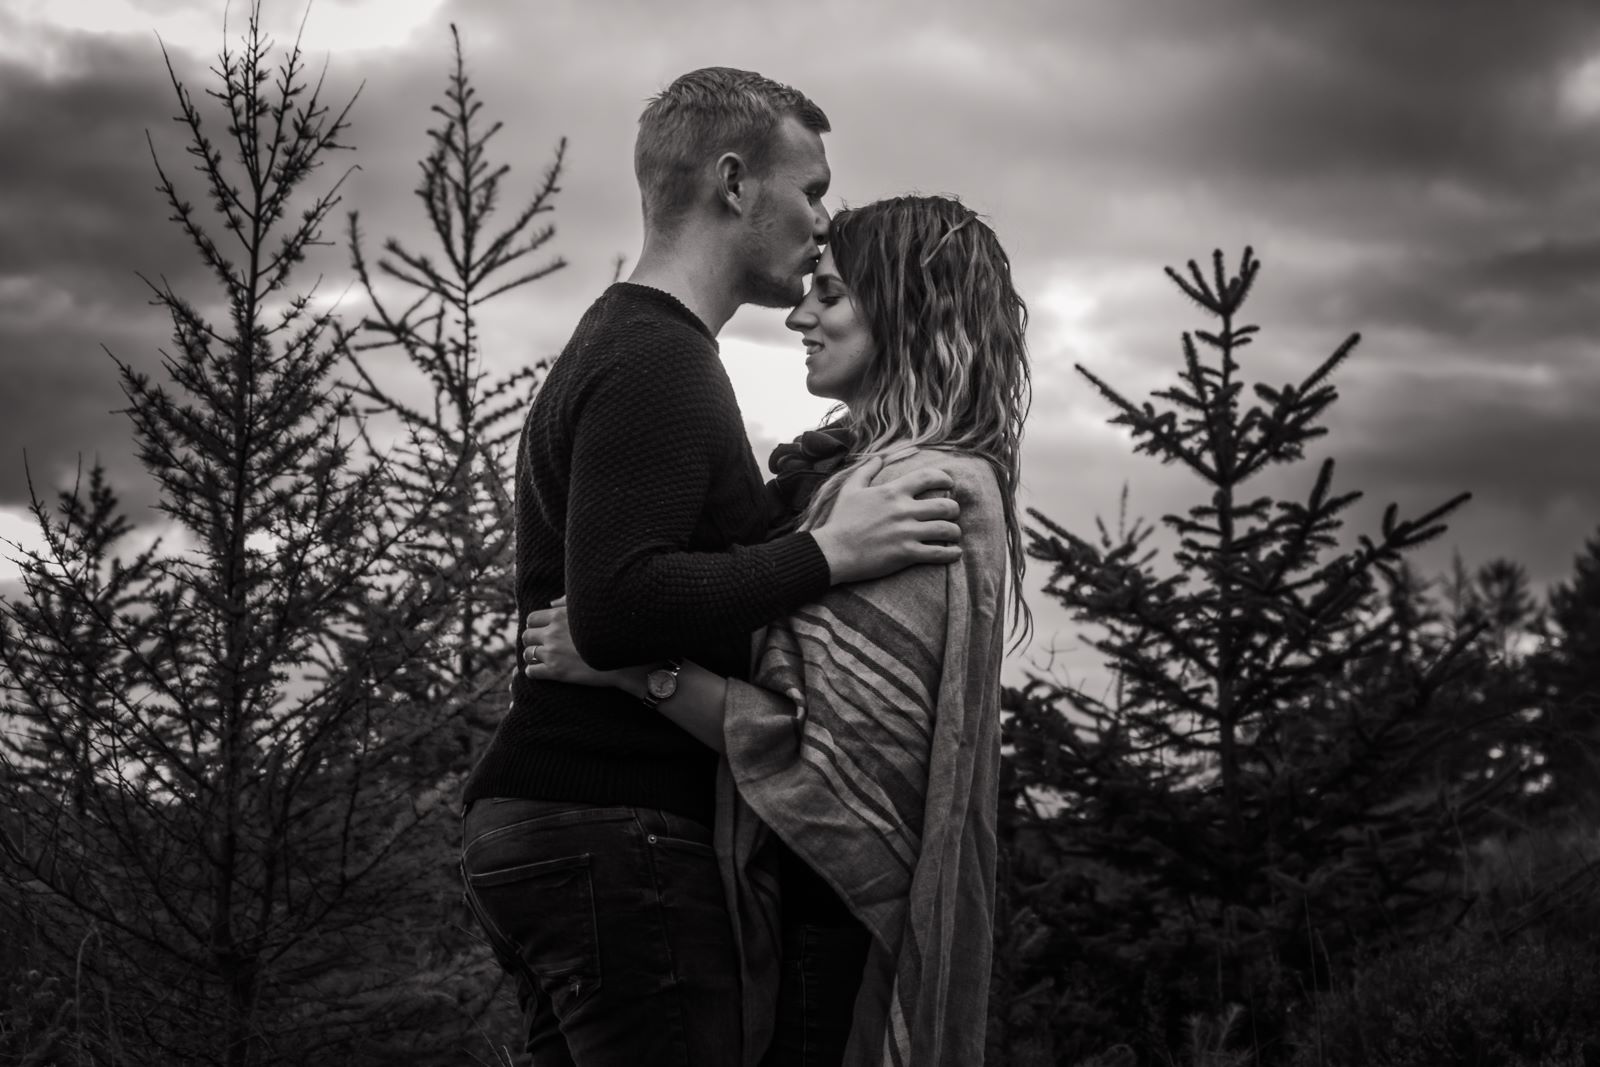 A groom-to-be is stood facing his fiance while kissing her forehead. There's christmas trees in the background and the image is black and white.